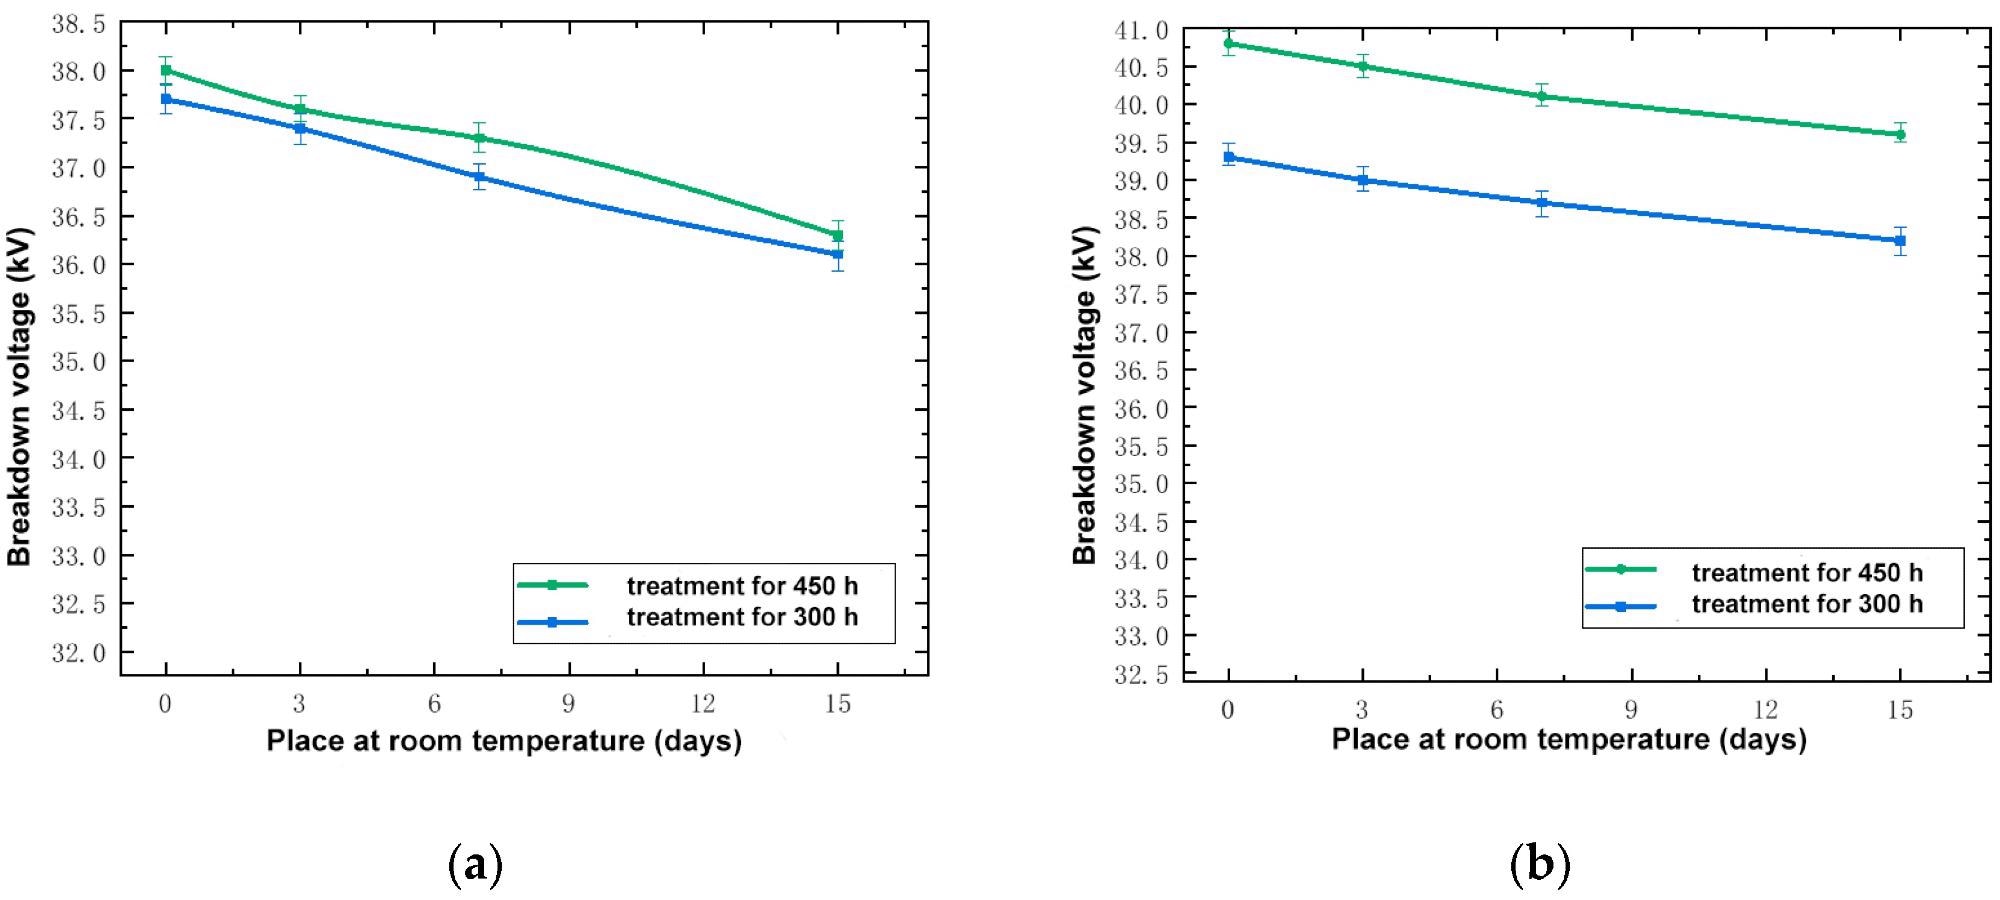 Relationship between breakdown voltage and days at room temperature. (a) Silicone rubber; (b) Fluorosilicone rubber.